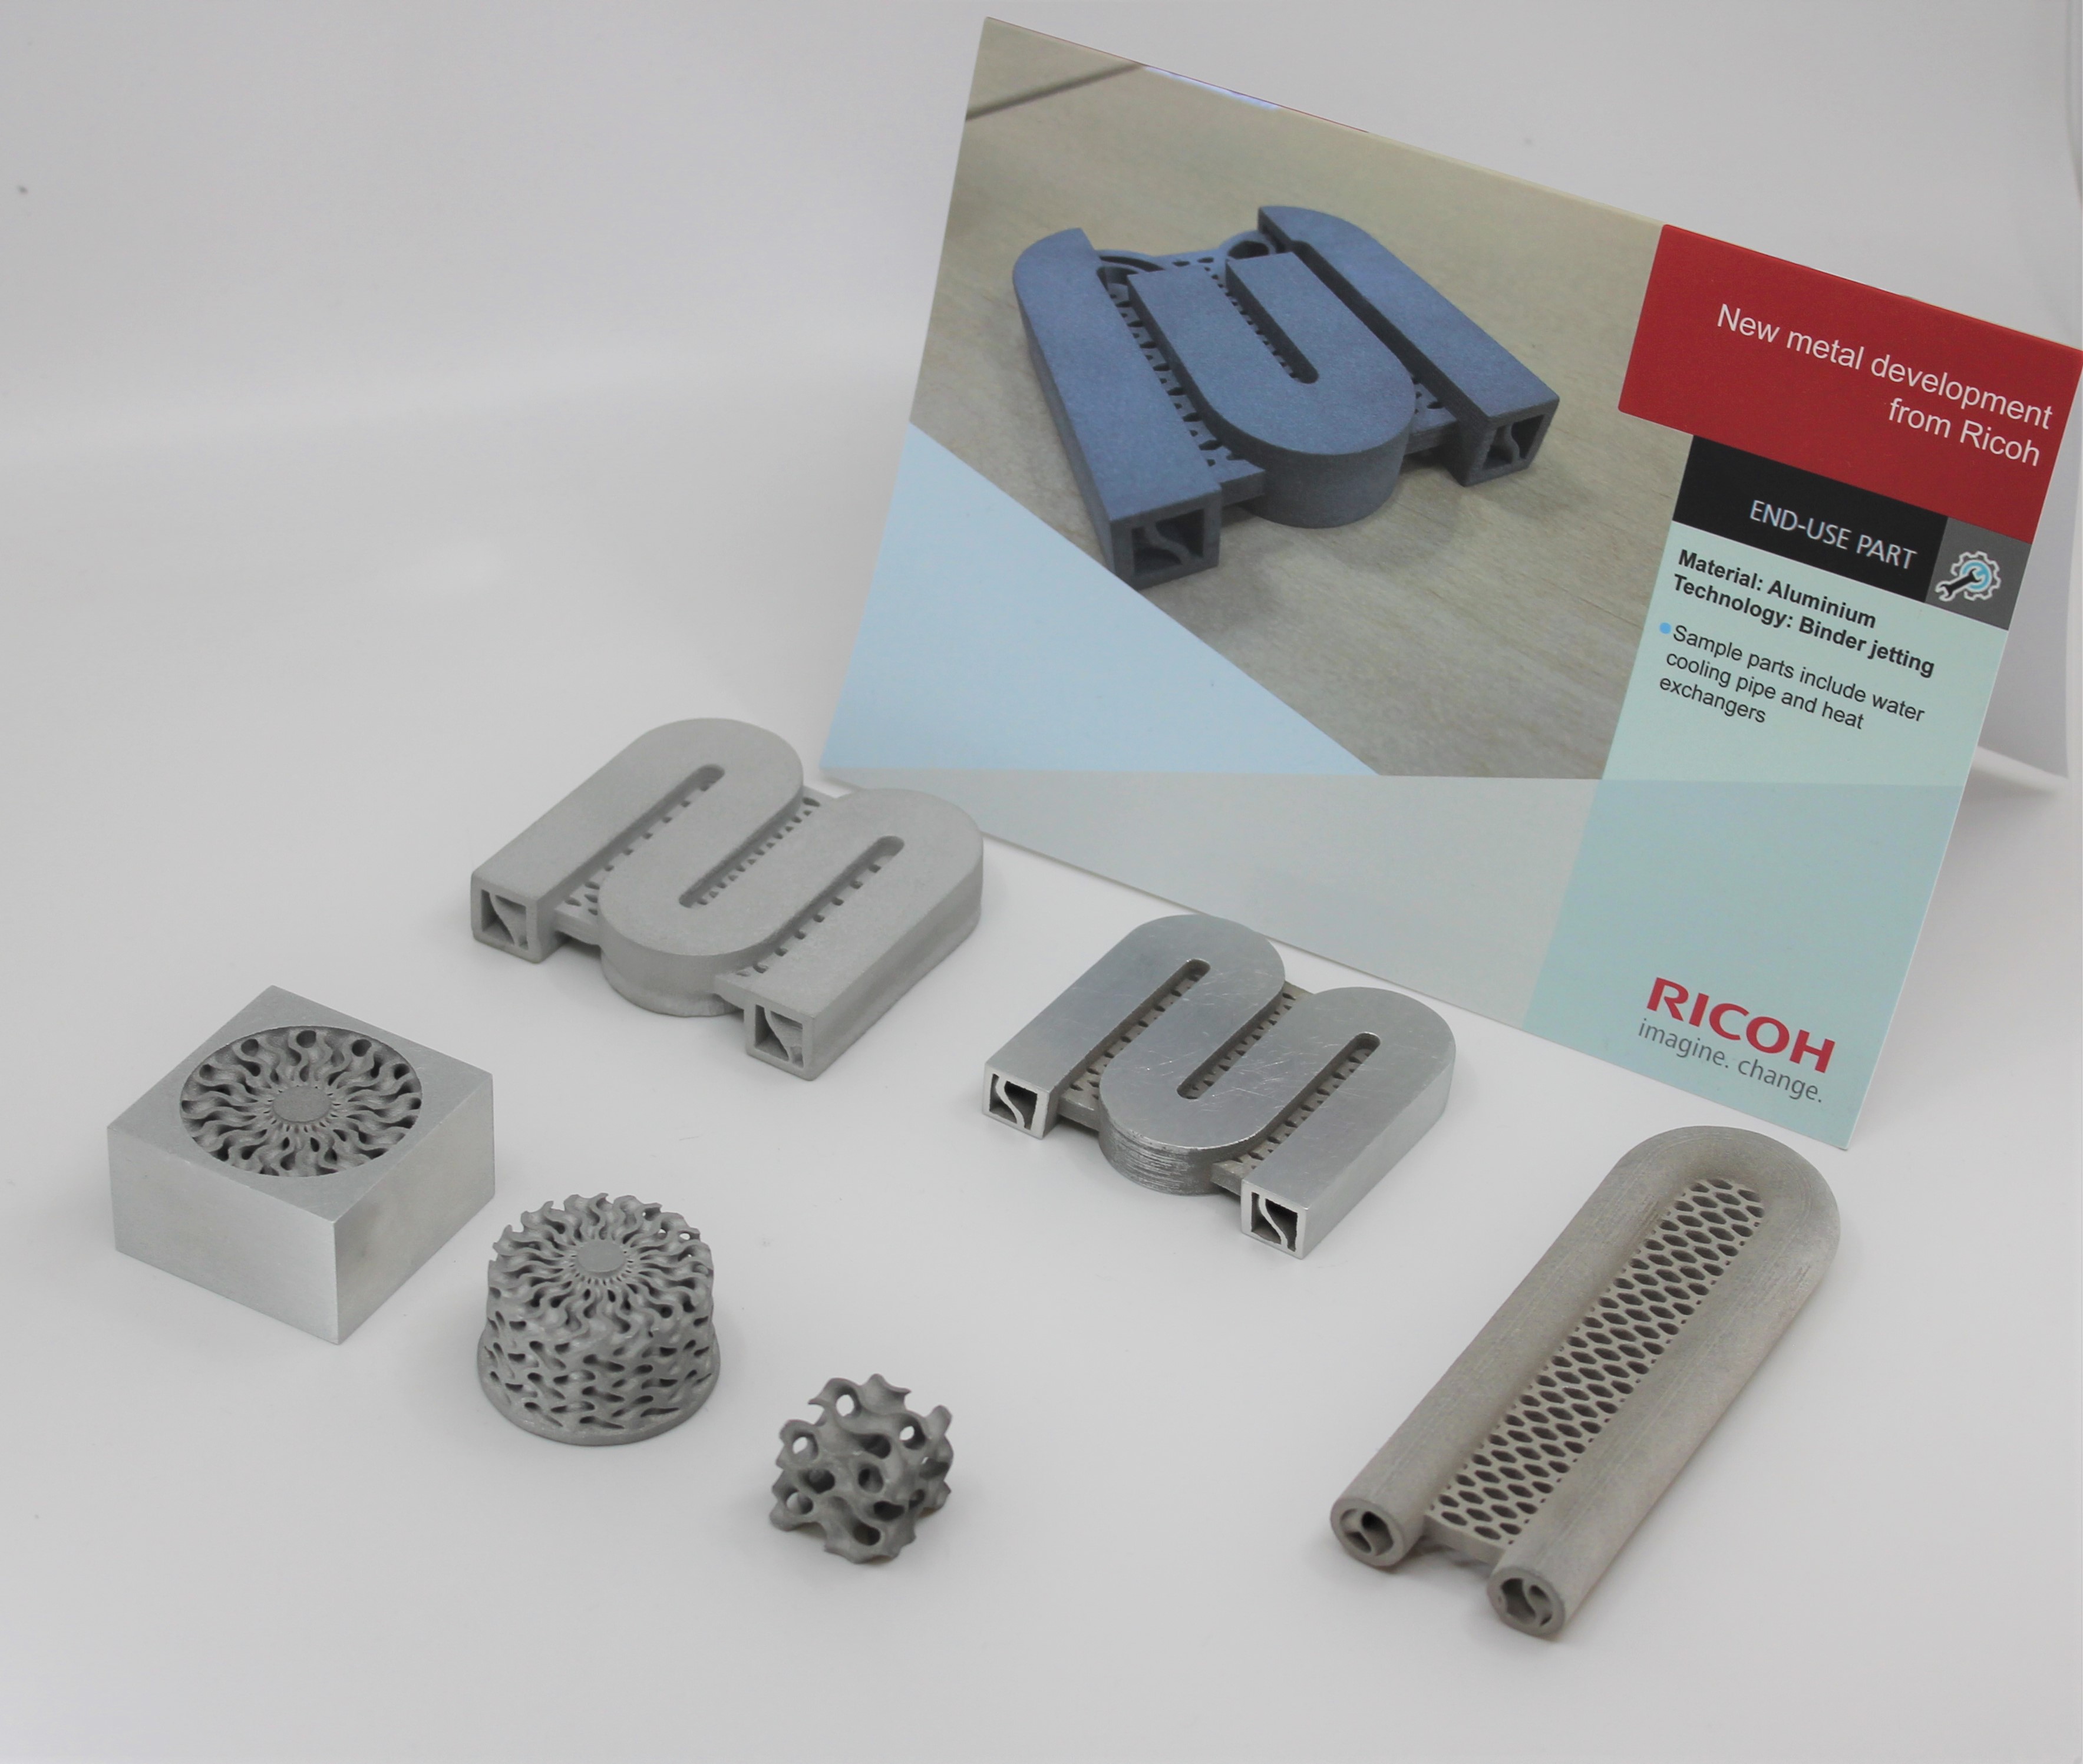 Ricoh’s Customer Experience Centre expands for co-creation of metal additive manufacturing